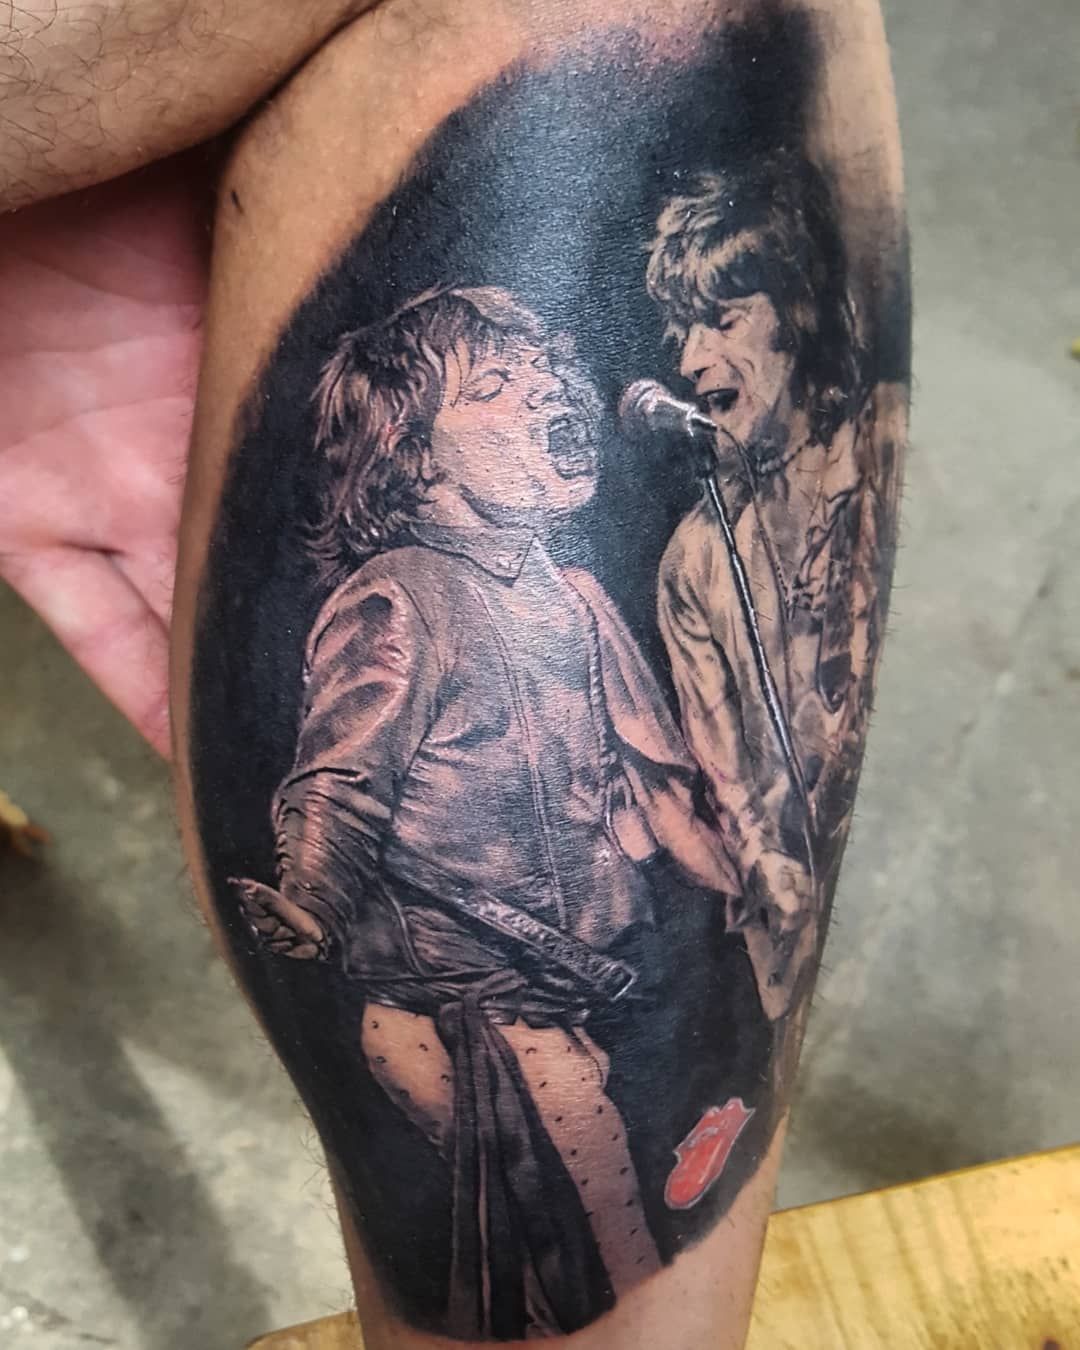 Repost jamiemahood from electric13tattoo in Austin Texas  Keith  Richards keithrichardstattoo blackandgra  Keith richards Tattoos  Black and grey tattoos